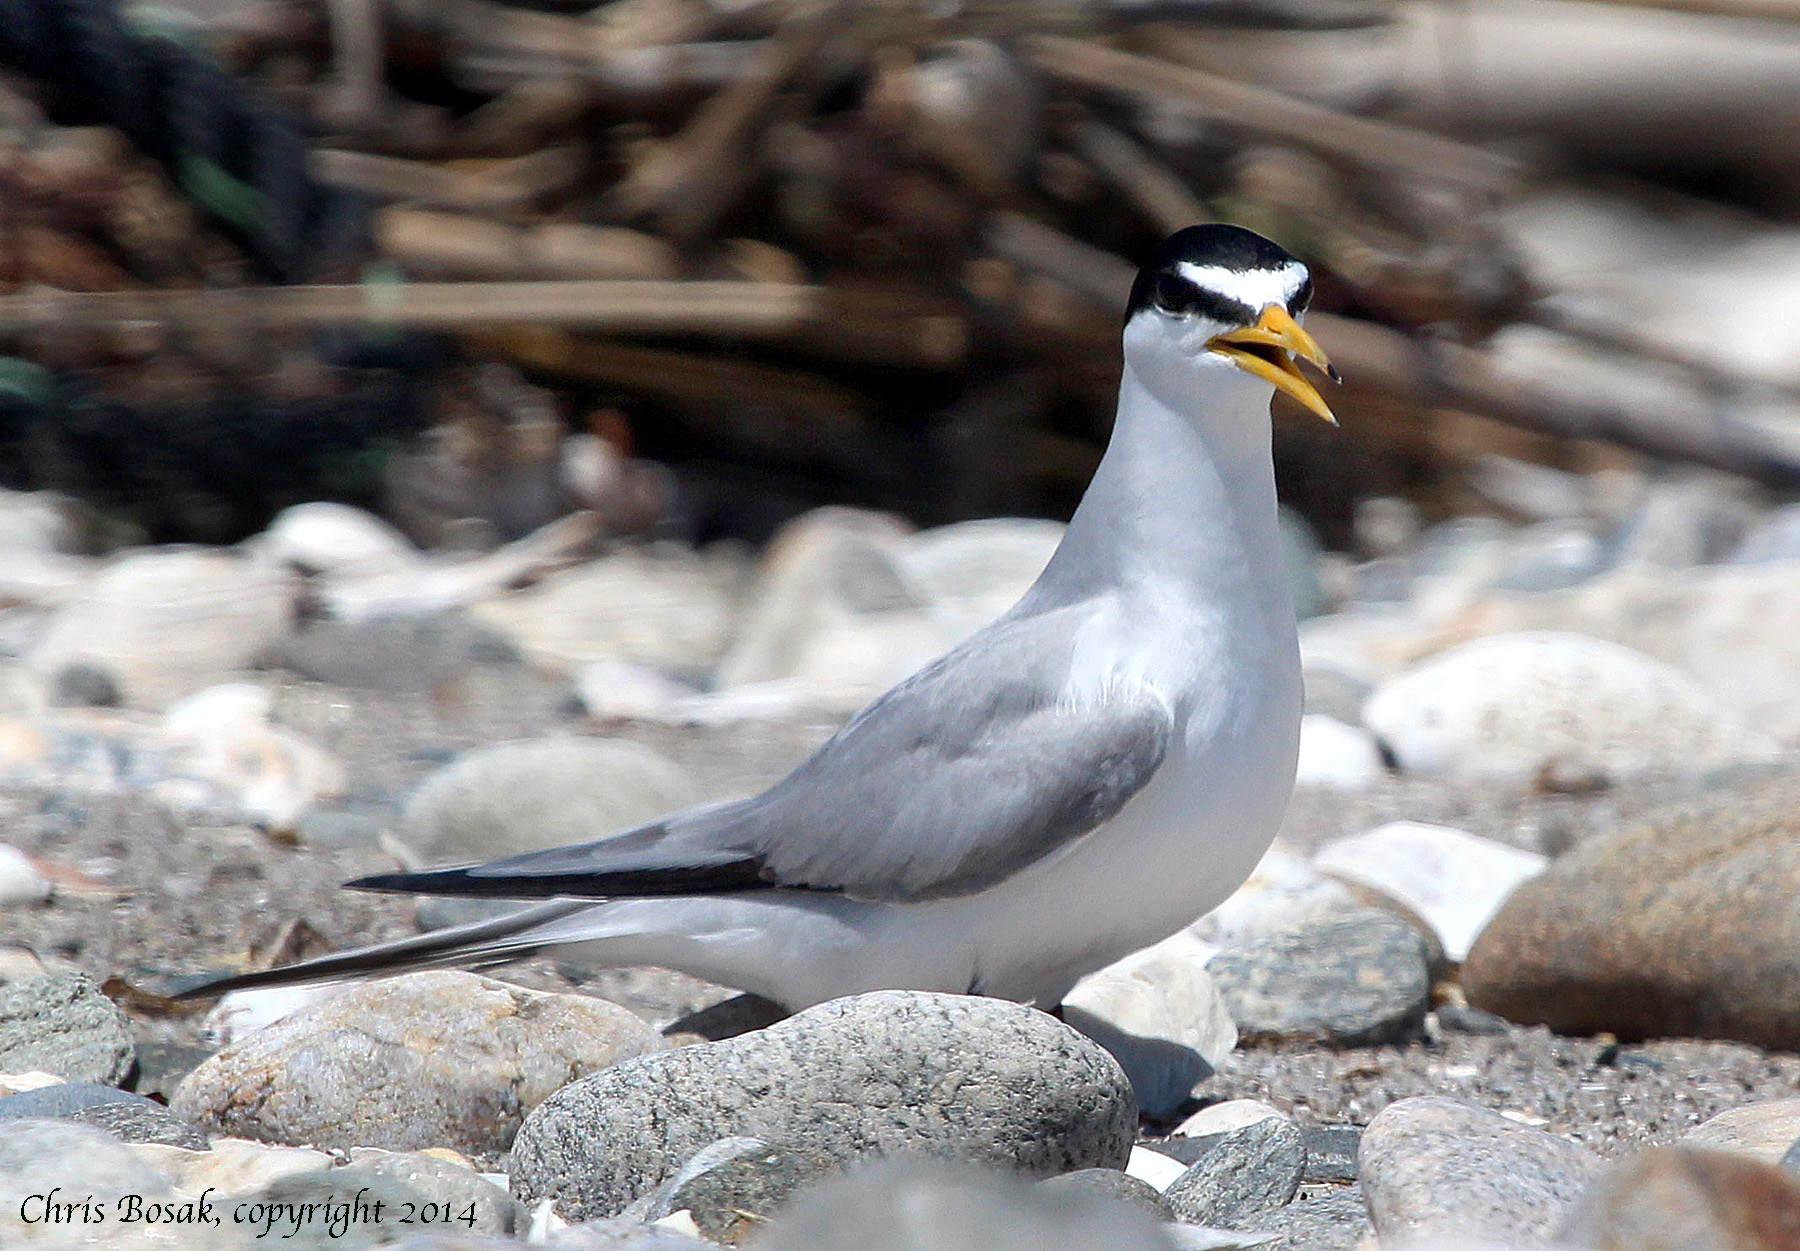 Photo by Chris Bosak A Least Tern sits among the rocks at the beach at Connecticut Audubon's Coastal Center at Milford Point in spring 2014.